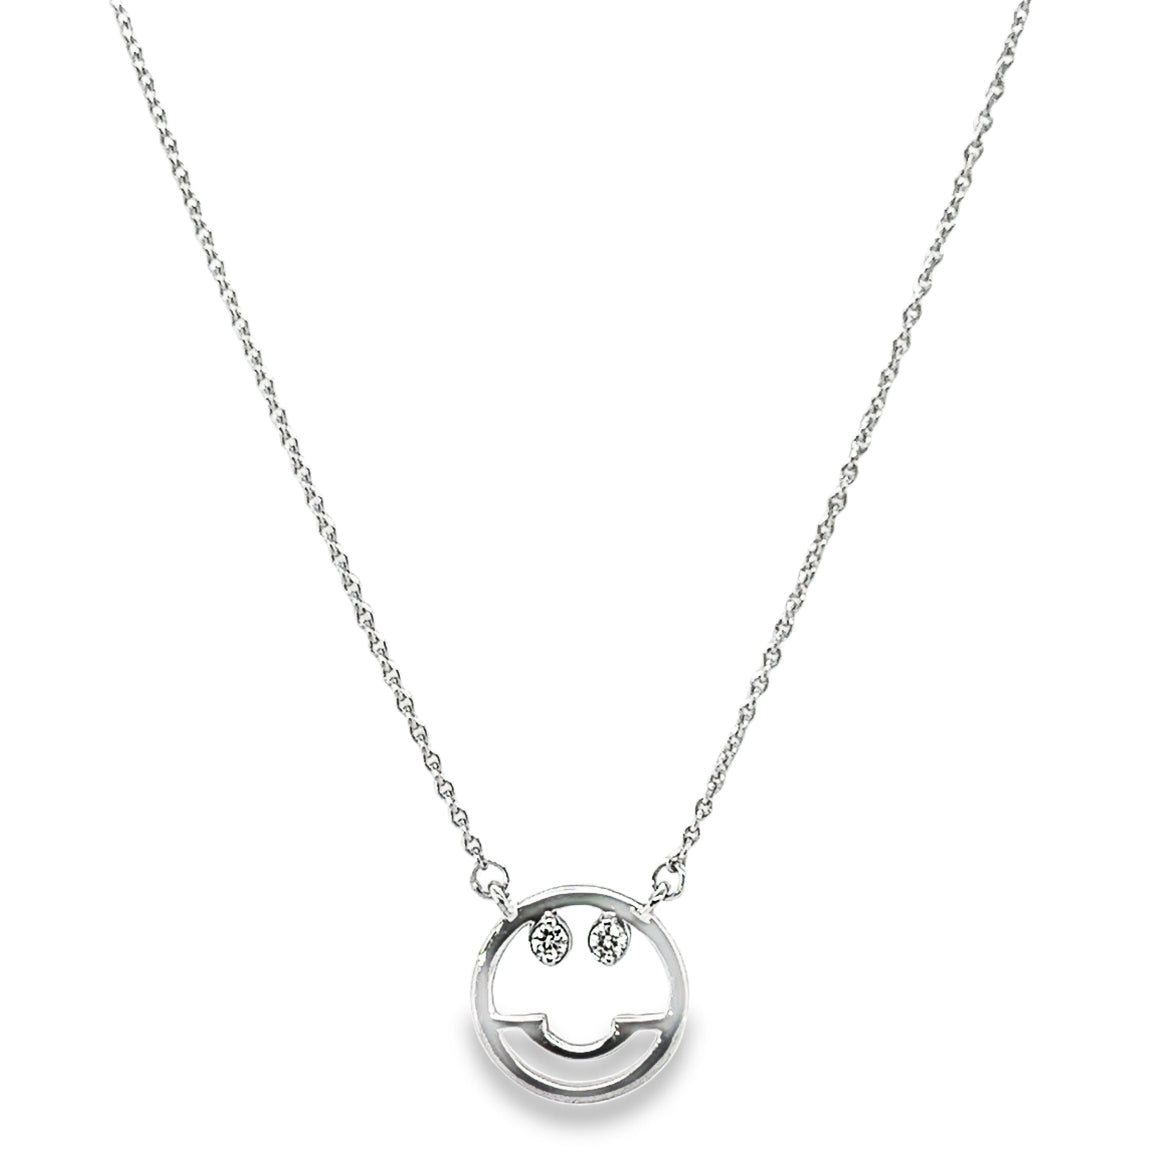 Smiley Face Diamond Necklace in 18K White gold - SIR1327